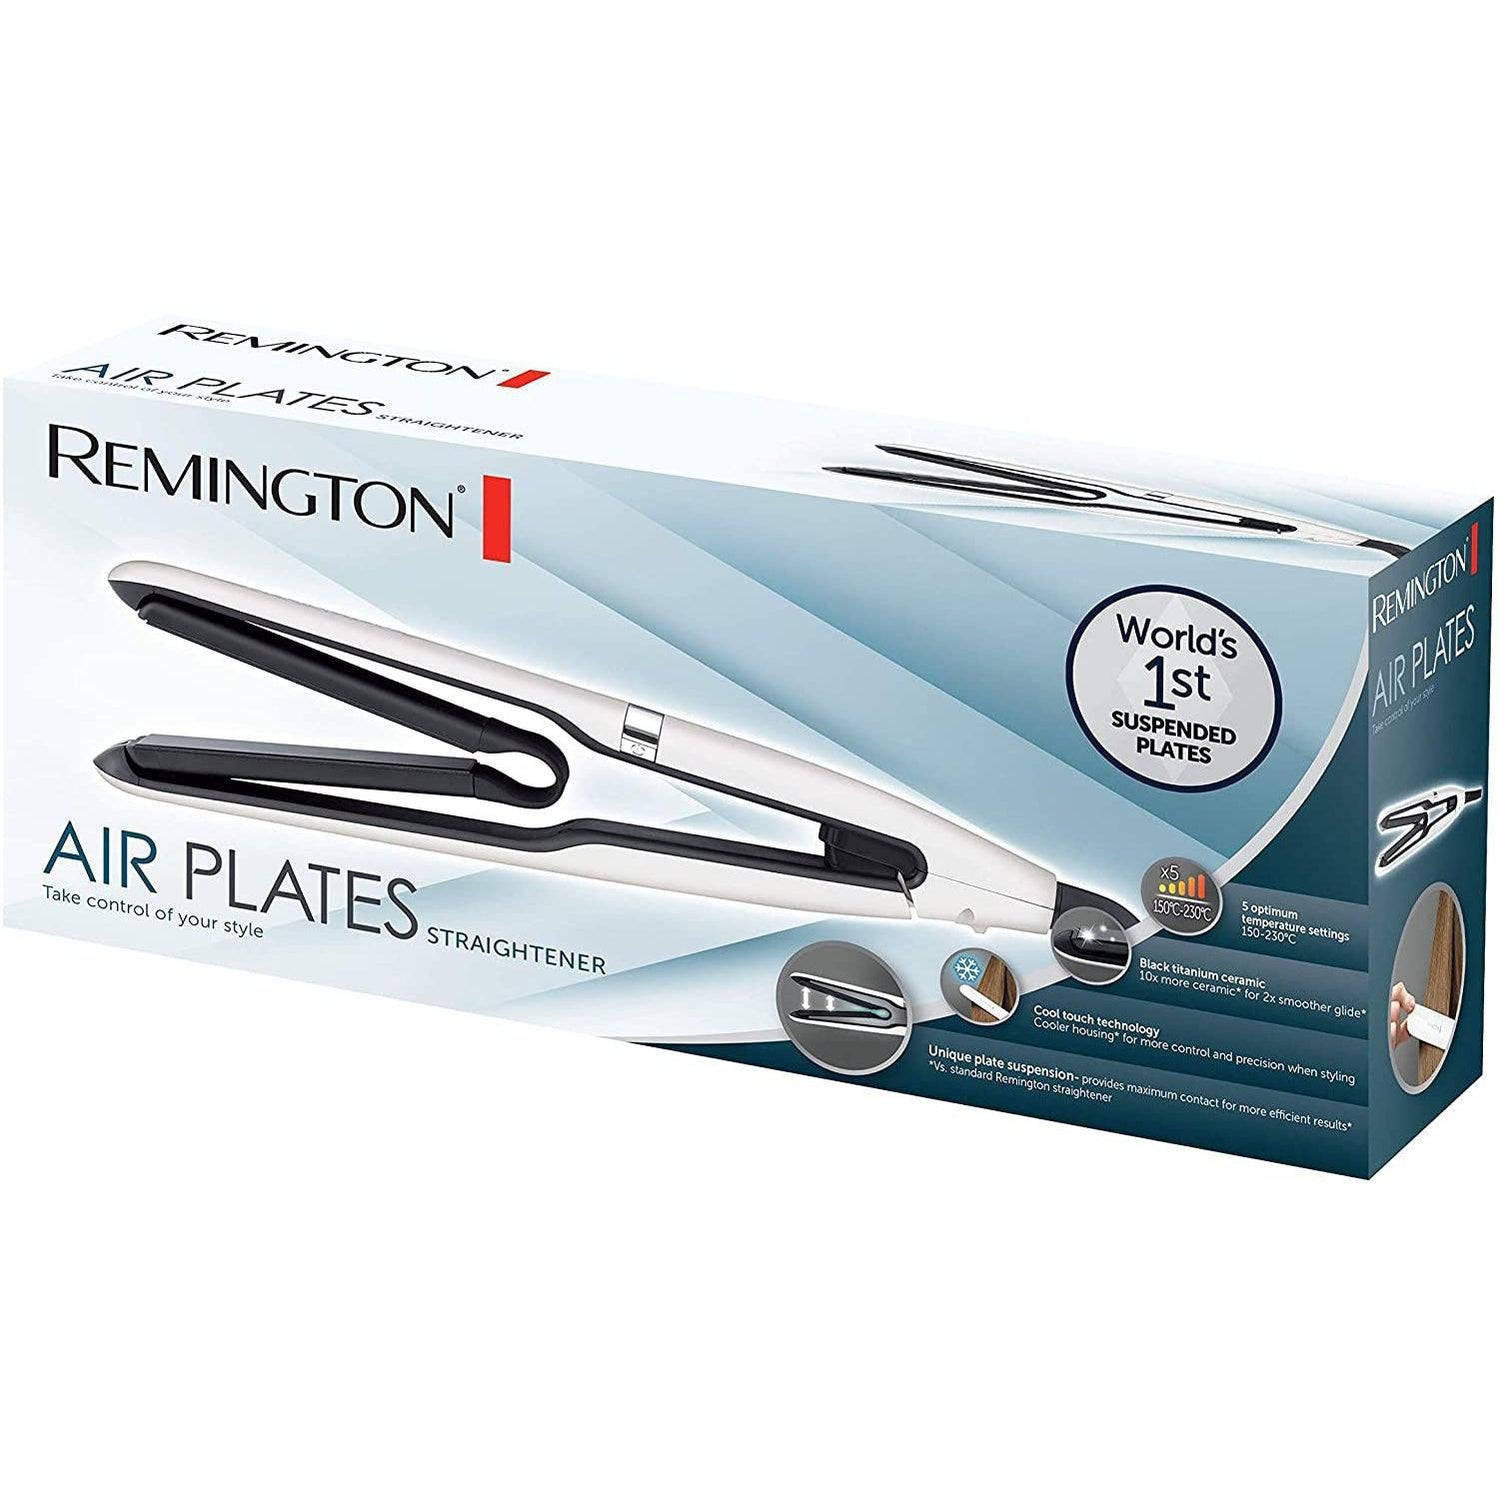 Remington Air Plates Titanium Ceramic Hair Straighteners, Floating Plates for Increased Contact - S7412